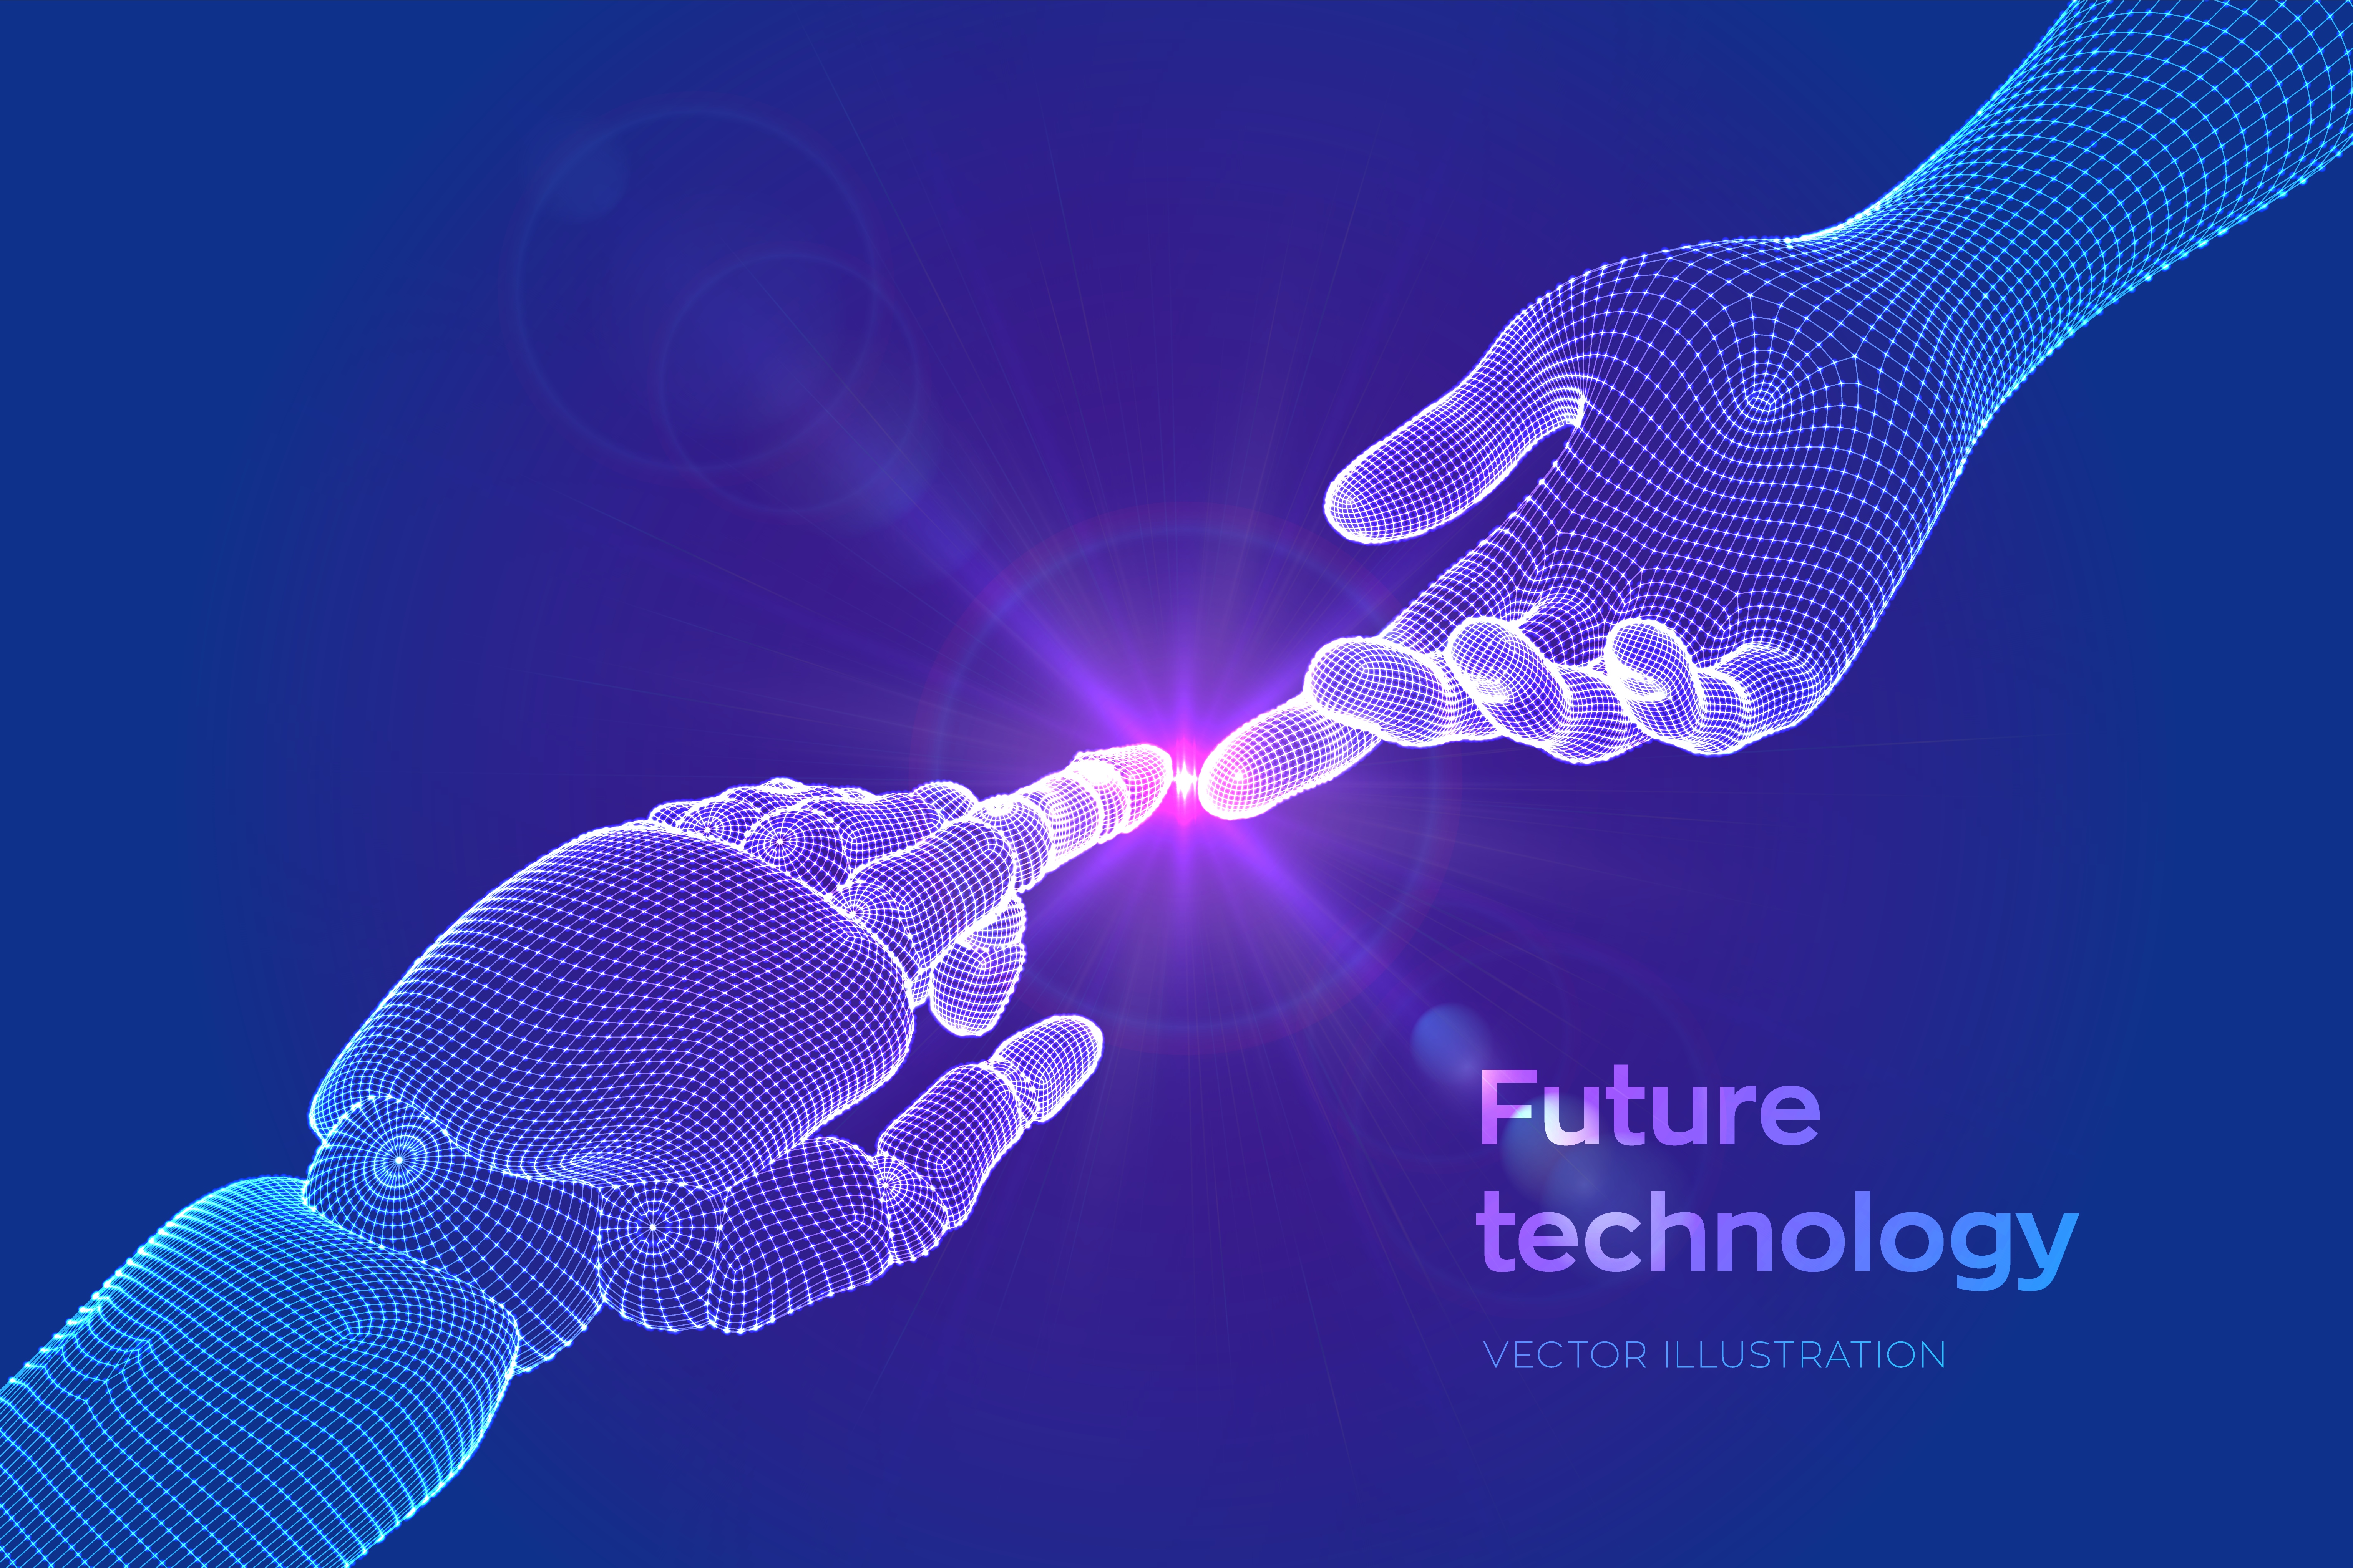 Hands Of Robot And Human Touching Download Free Vectors Clipart